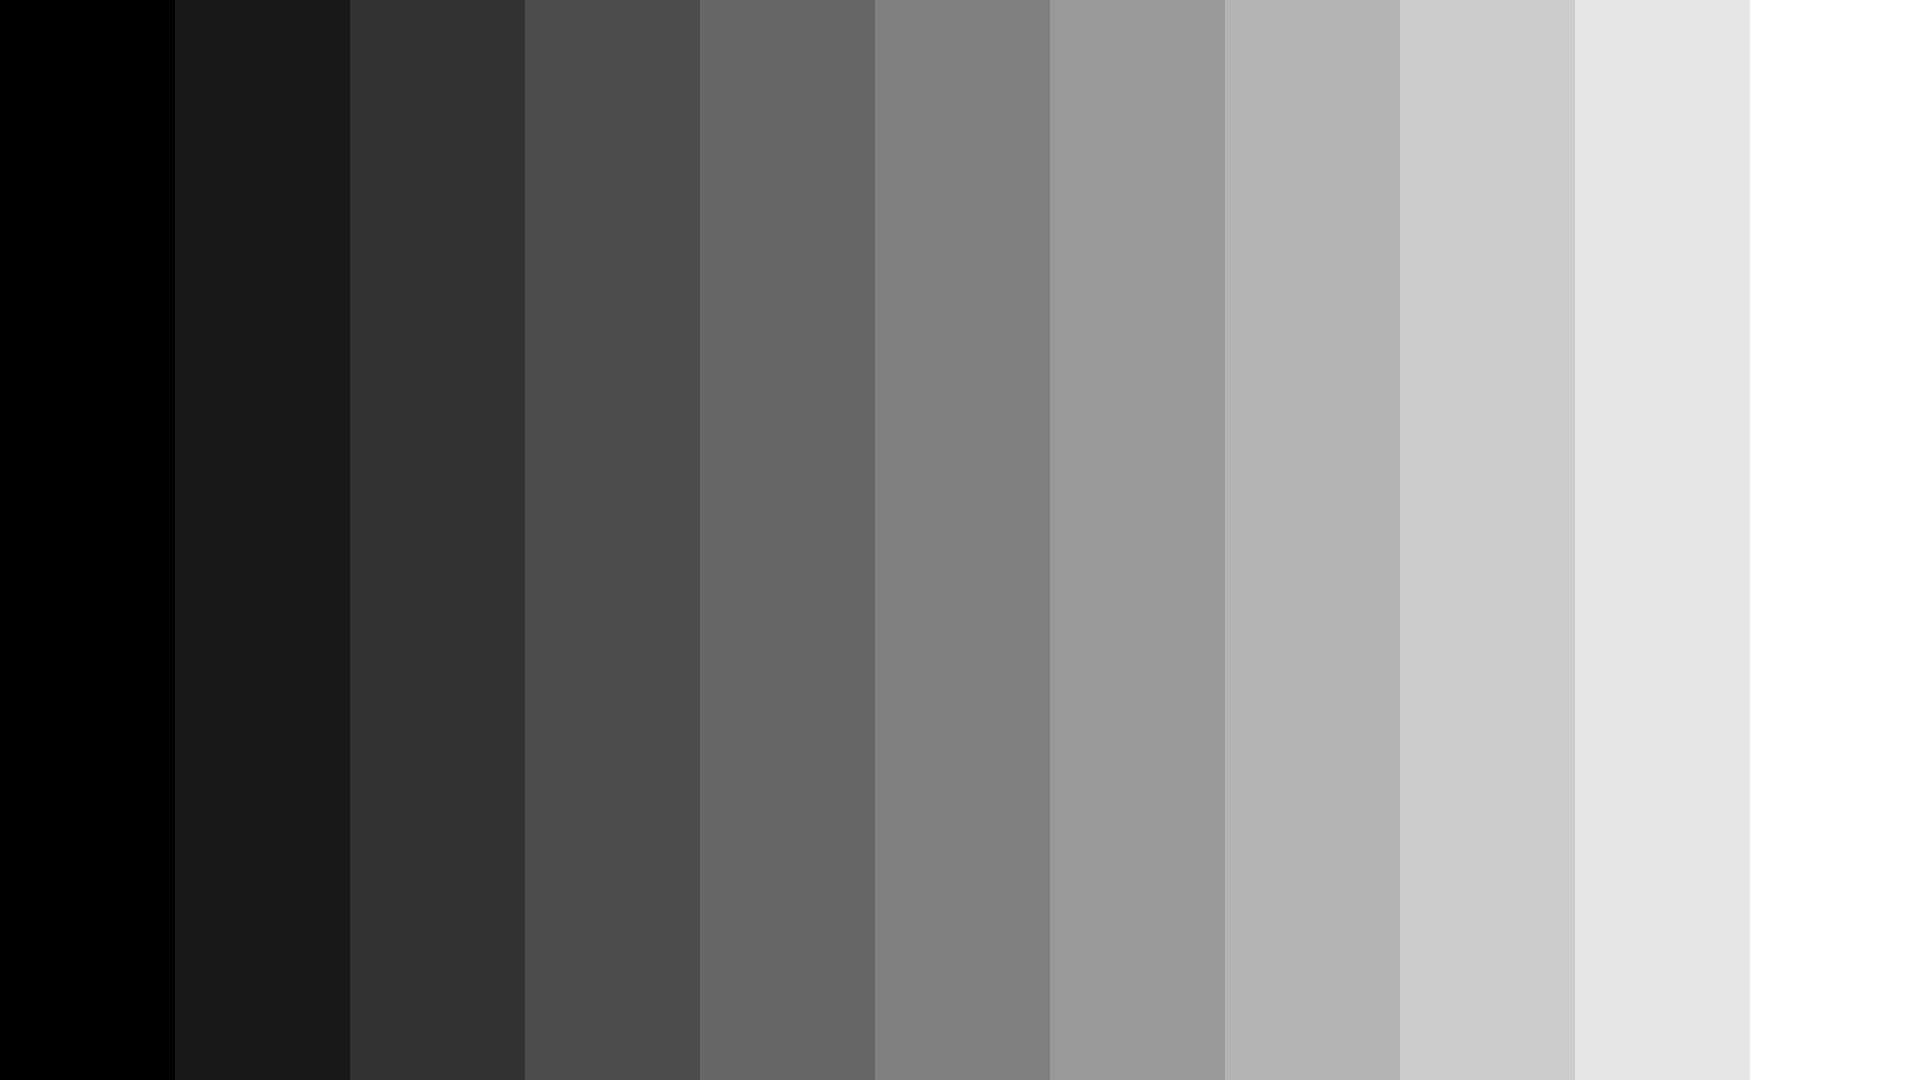 Grayscale Blend Layer